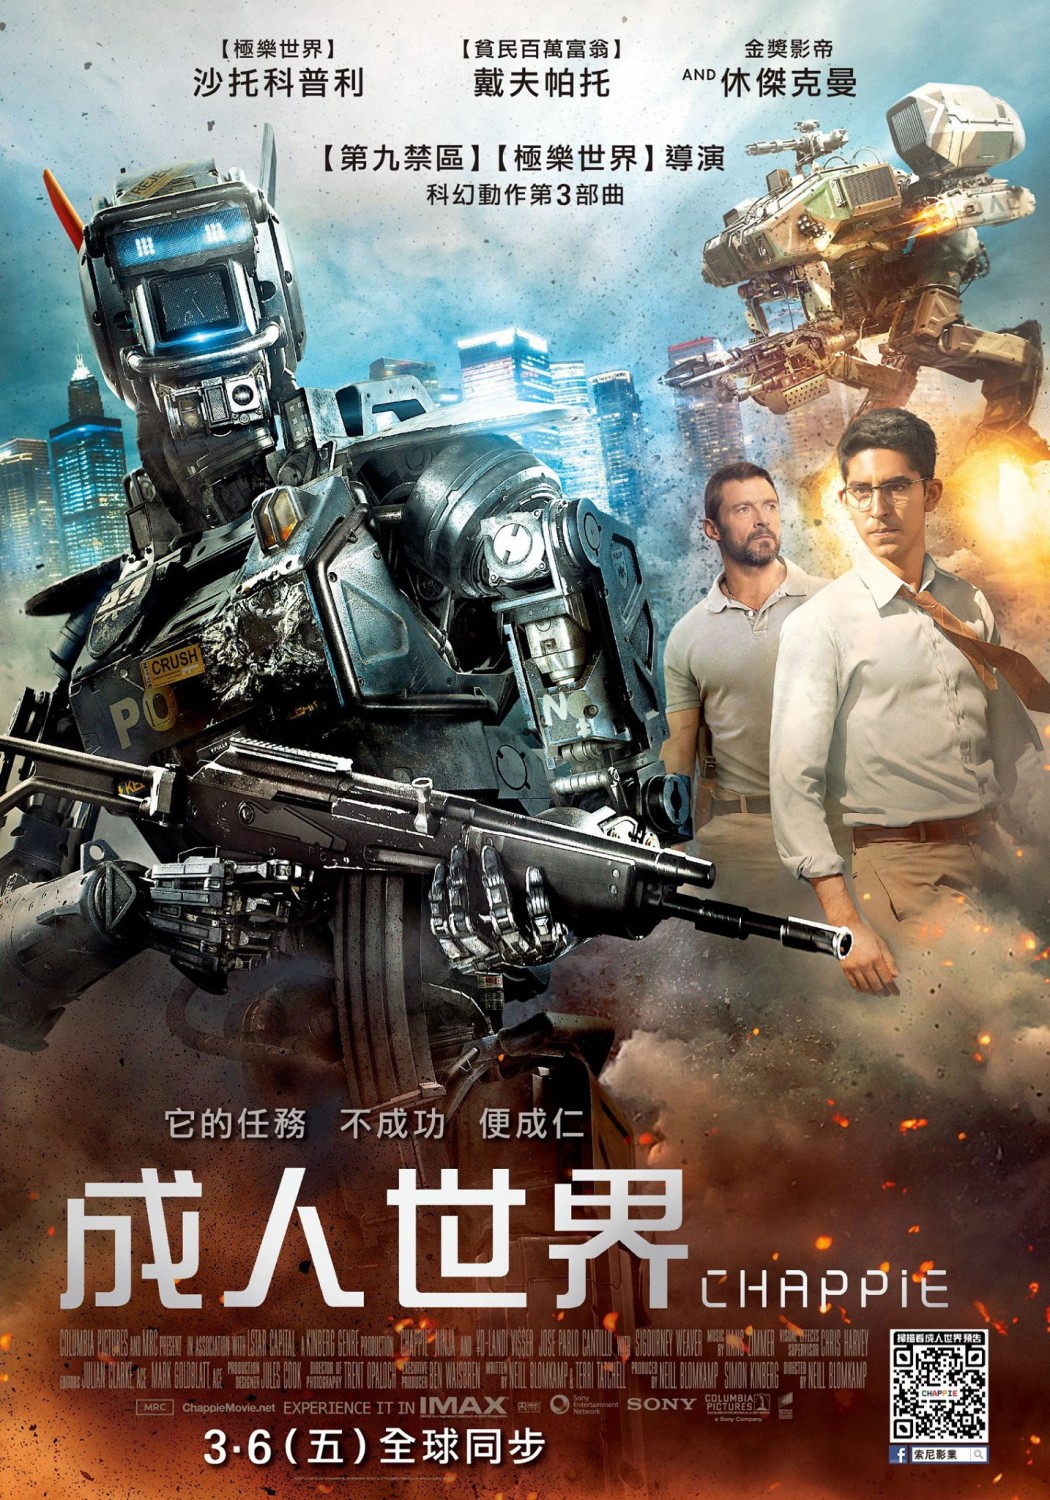 Extra Large Movie Poster Image for Chappie (#3 of 6)